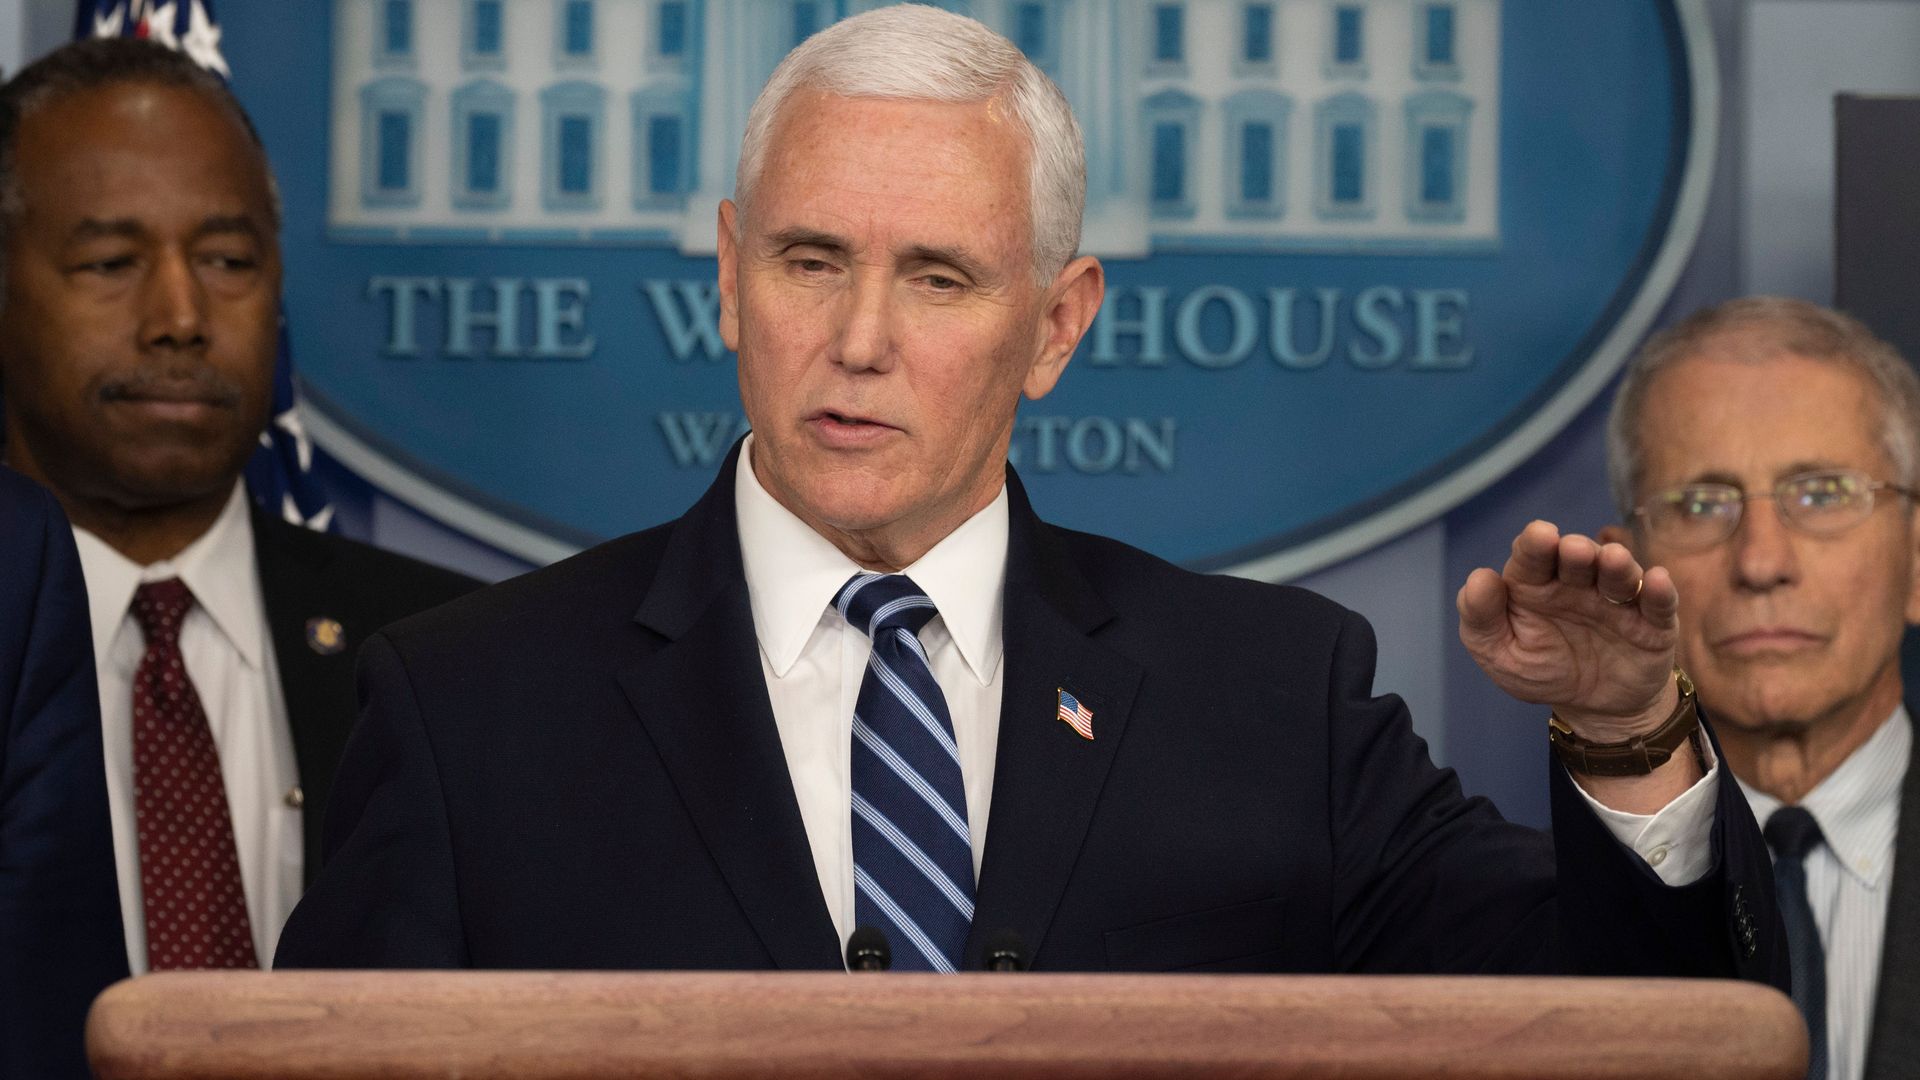 In this image, Pence stands behind a podium in the White House briefing room while wearing a suit